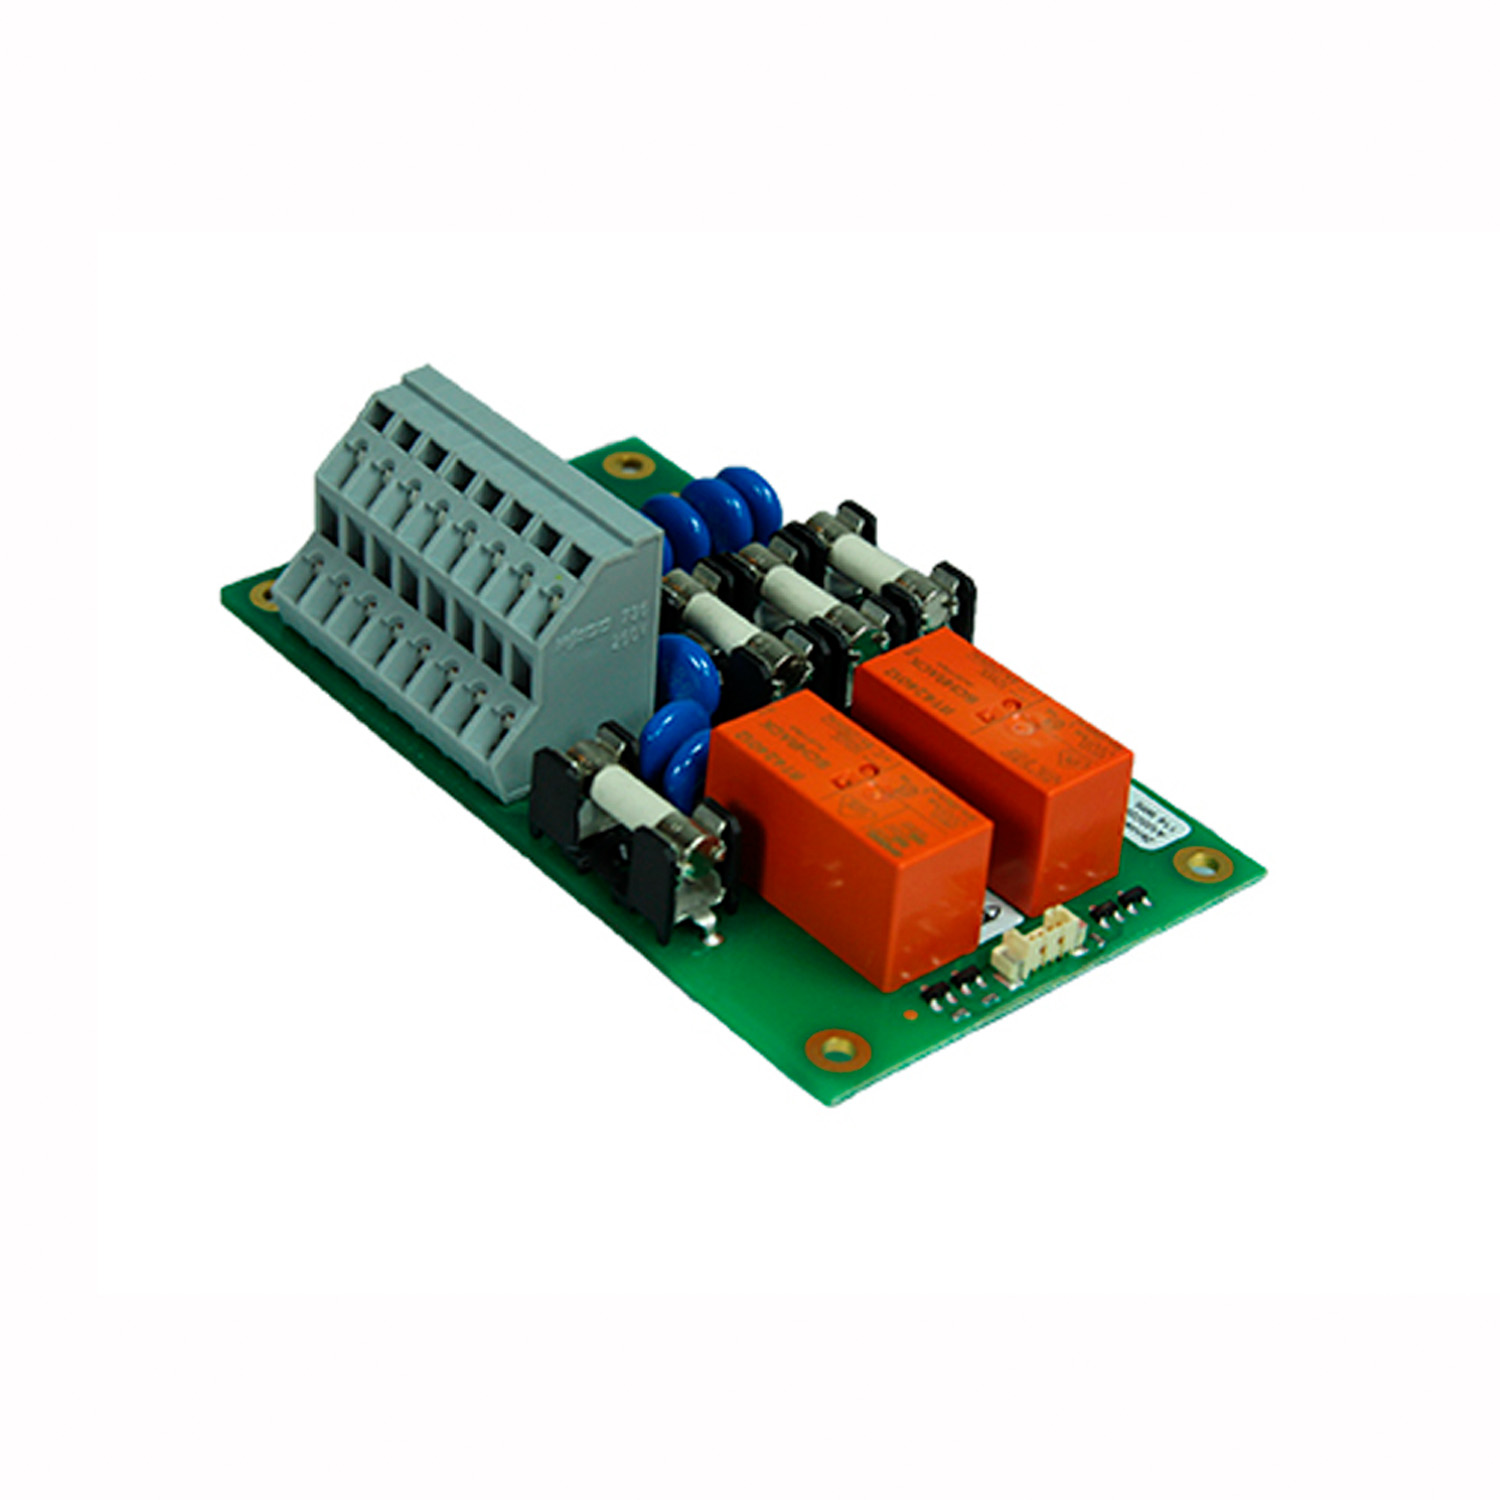 1008140100 TA-10 Connection board with relays for Turbine/Exigo industrial